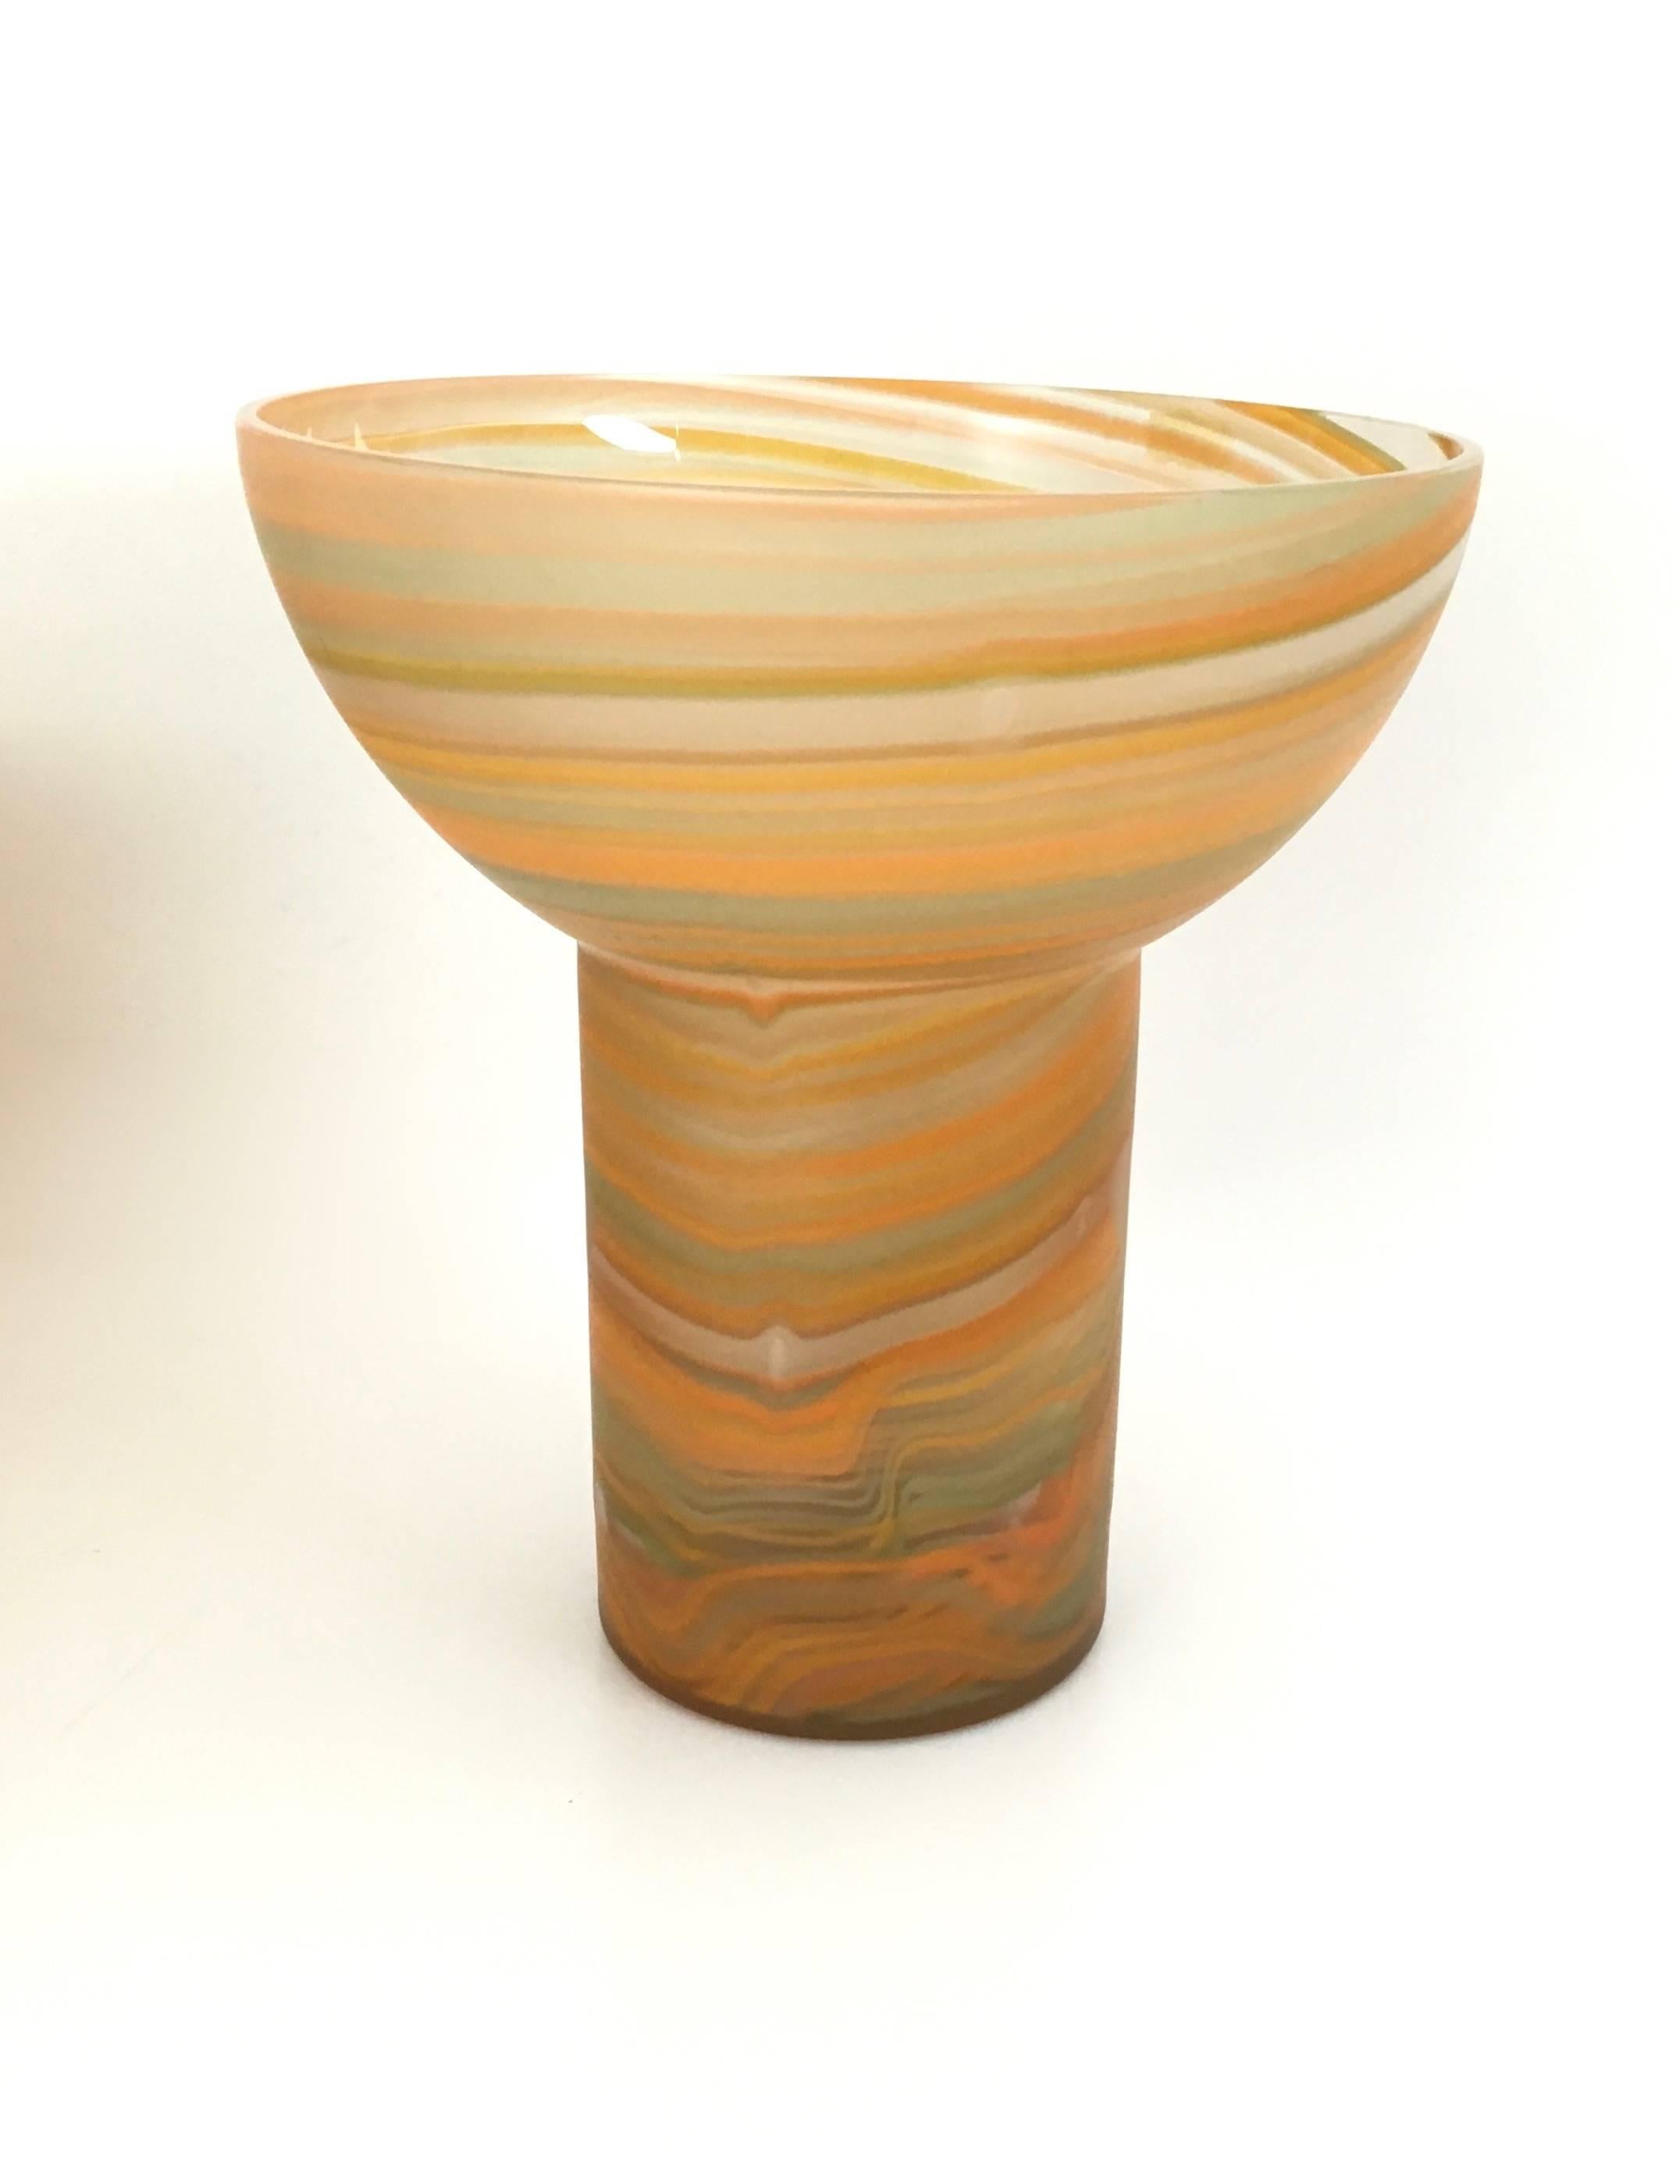 Made from blown glass.

Measures: Bowl
diameter 34 x height 13 cm

Vase
diameter 20 x height 23 cm.
         